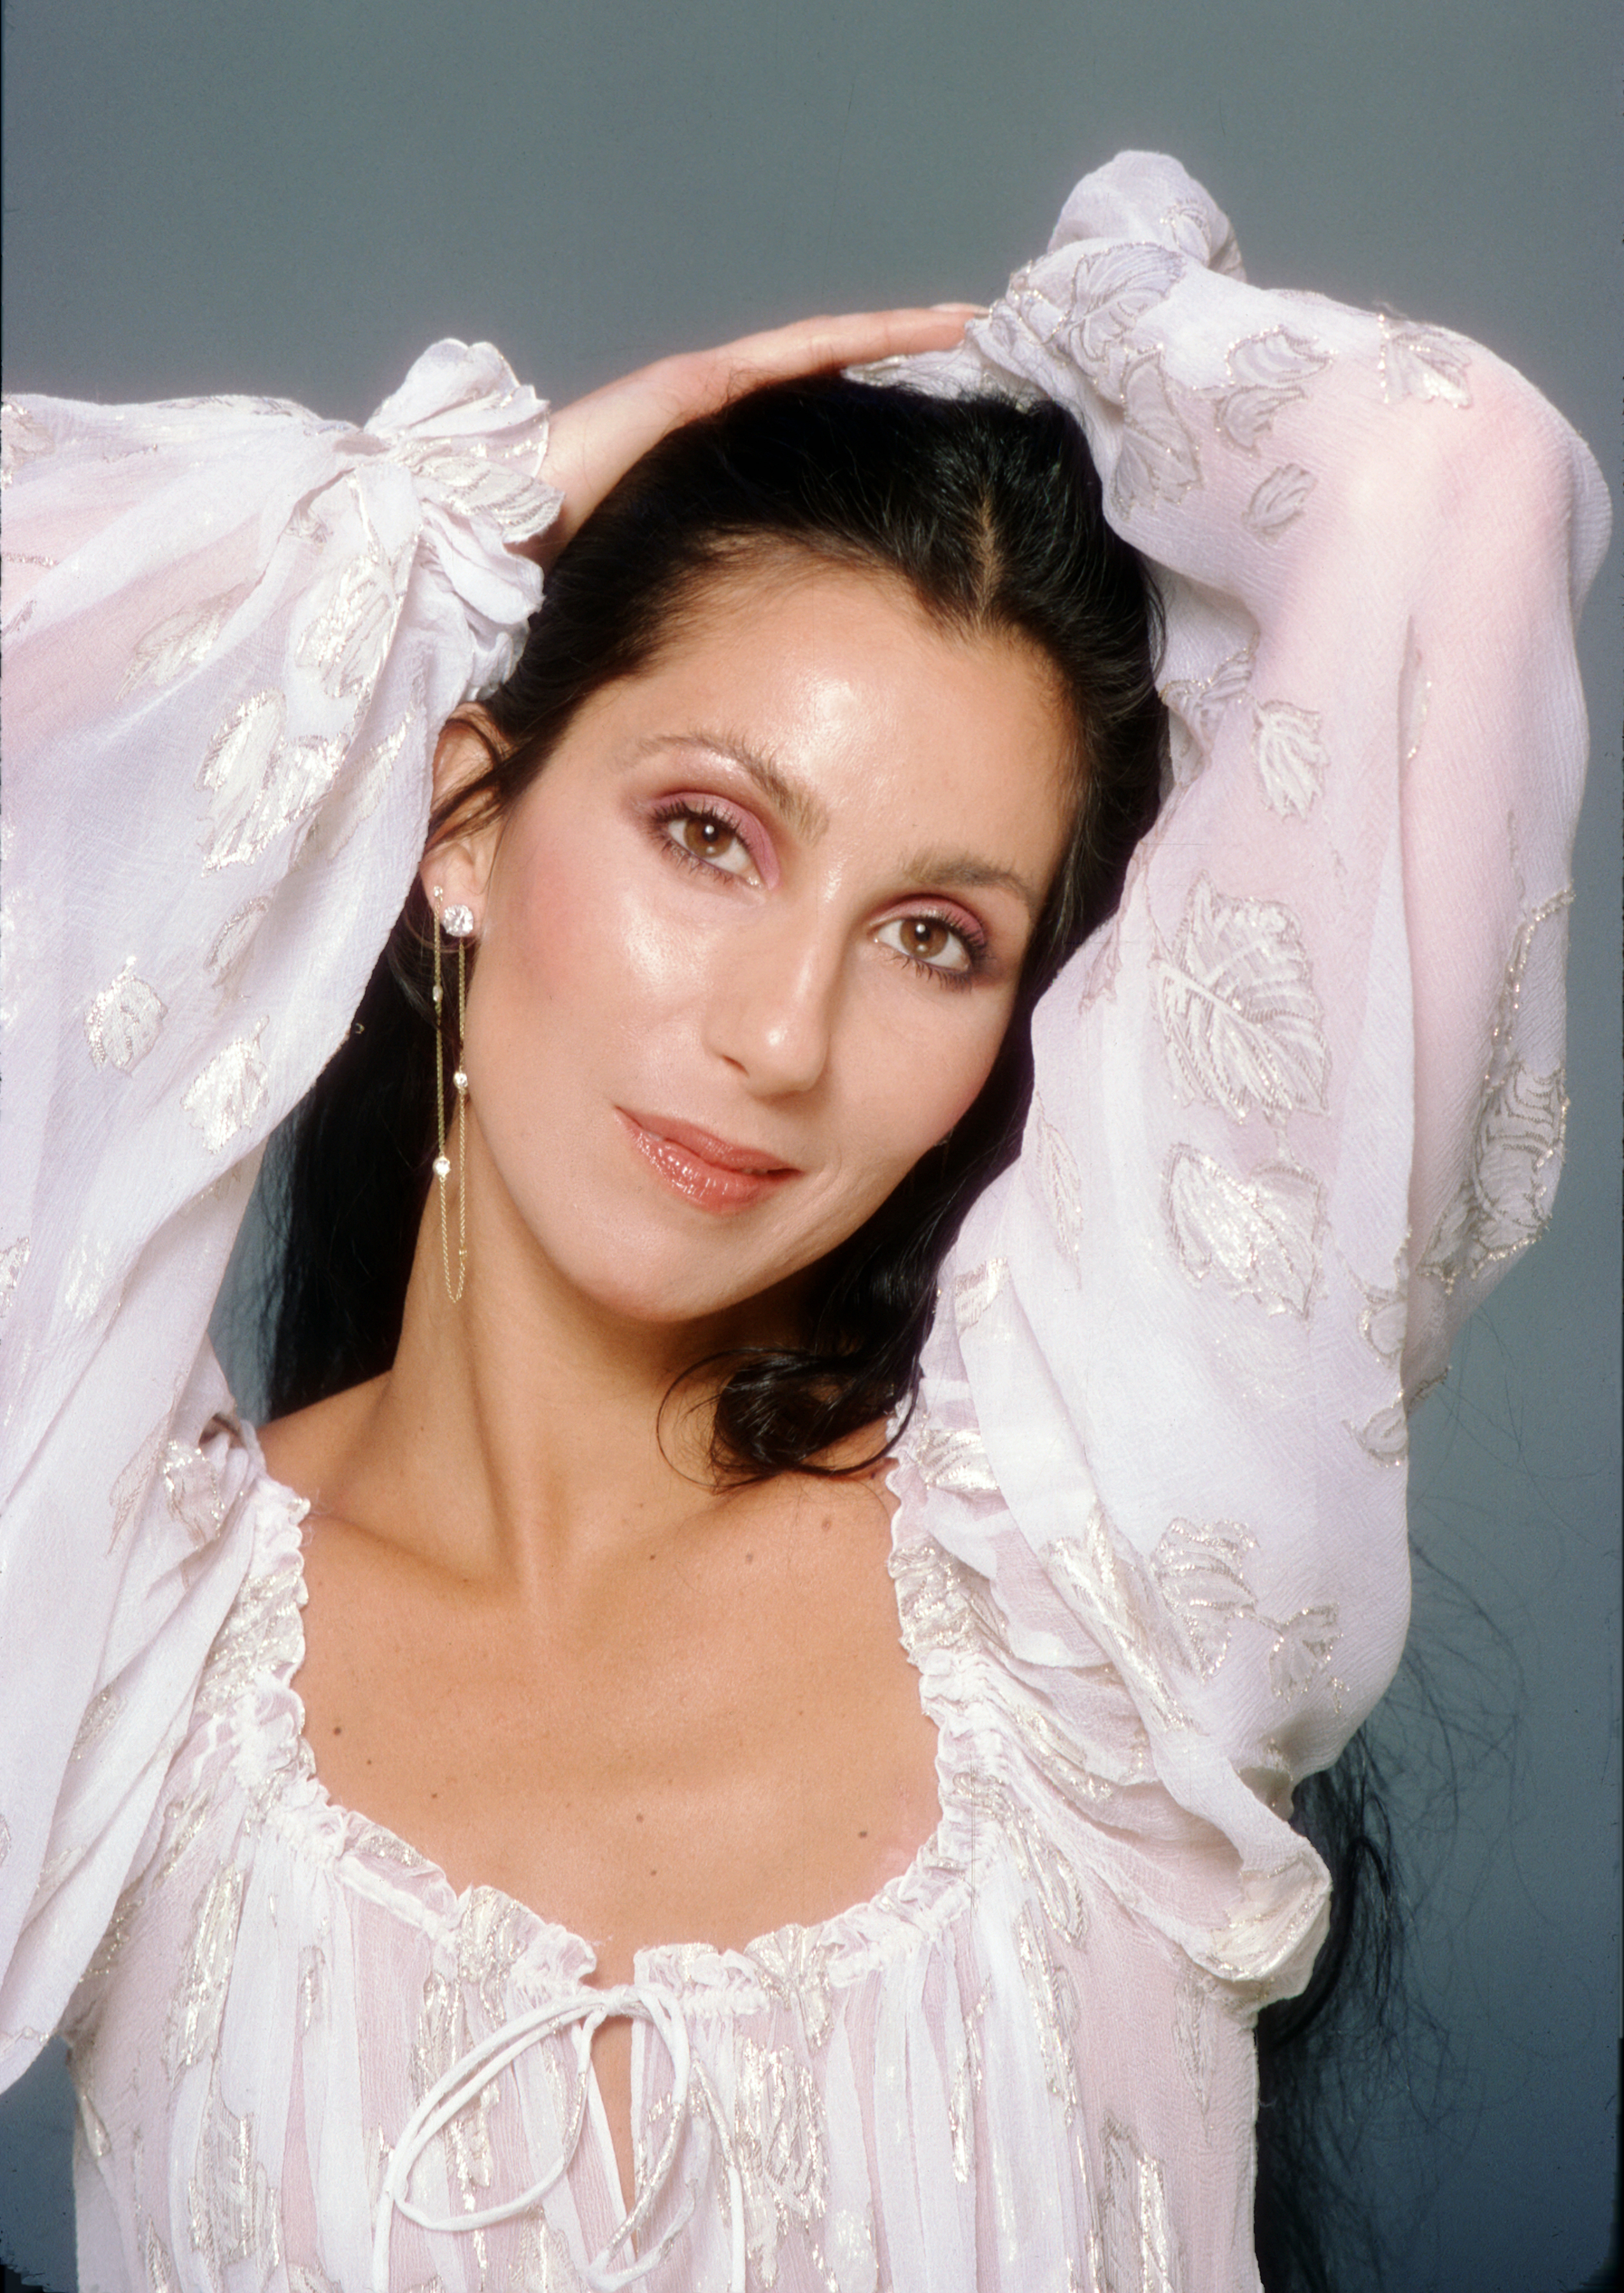 Cher poses for a portrait in Los Angeles, California in 1978 | Source: Getty Images